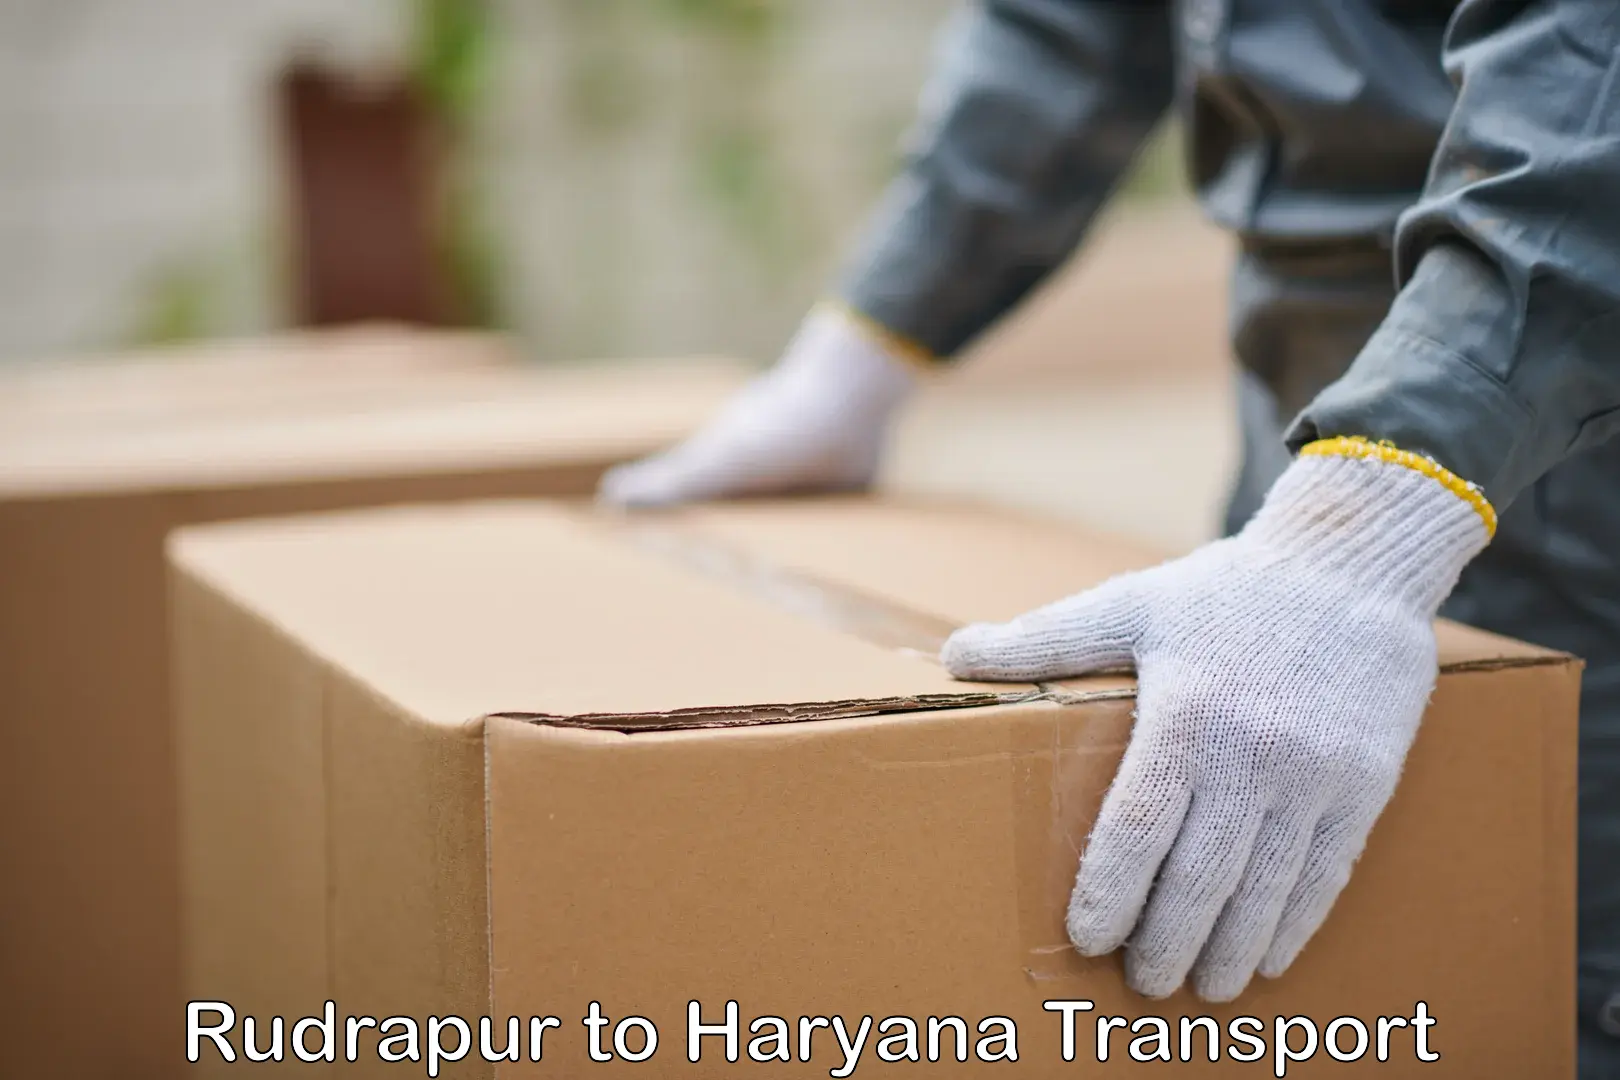 Express transport services in Rudrapur to Julana